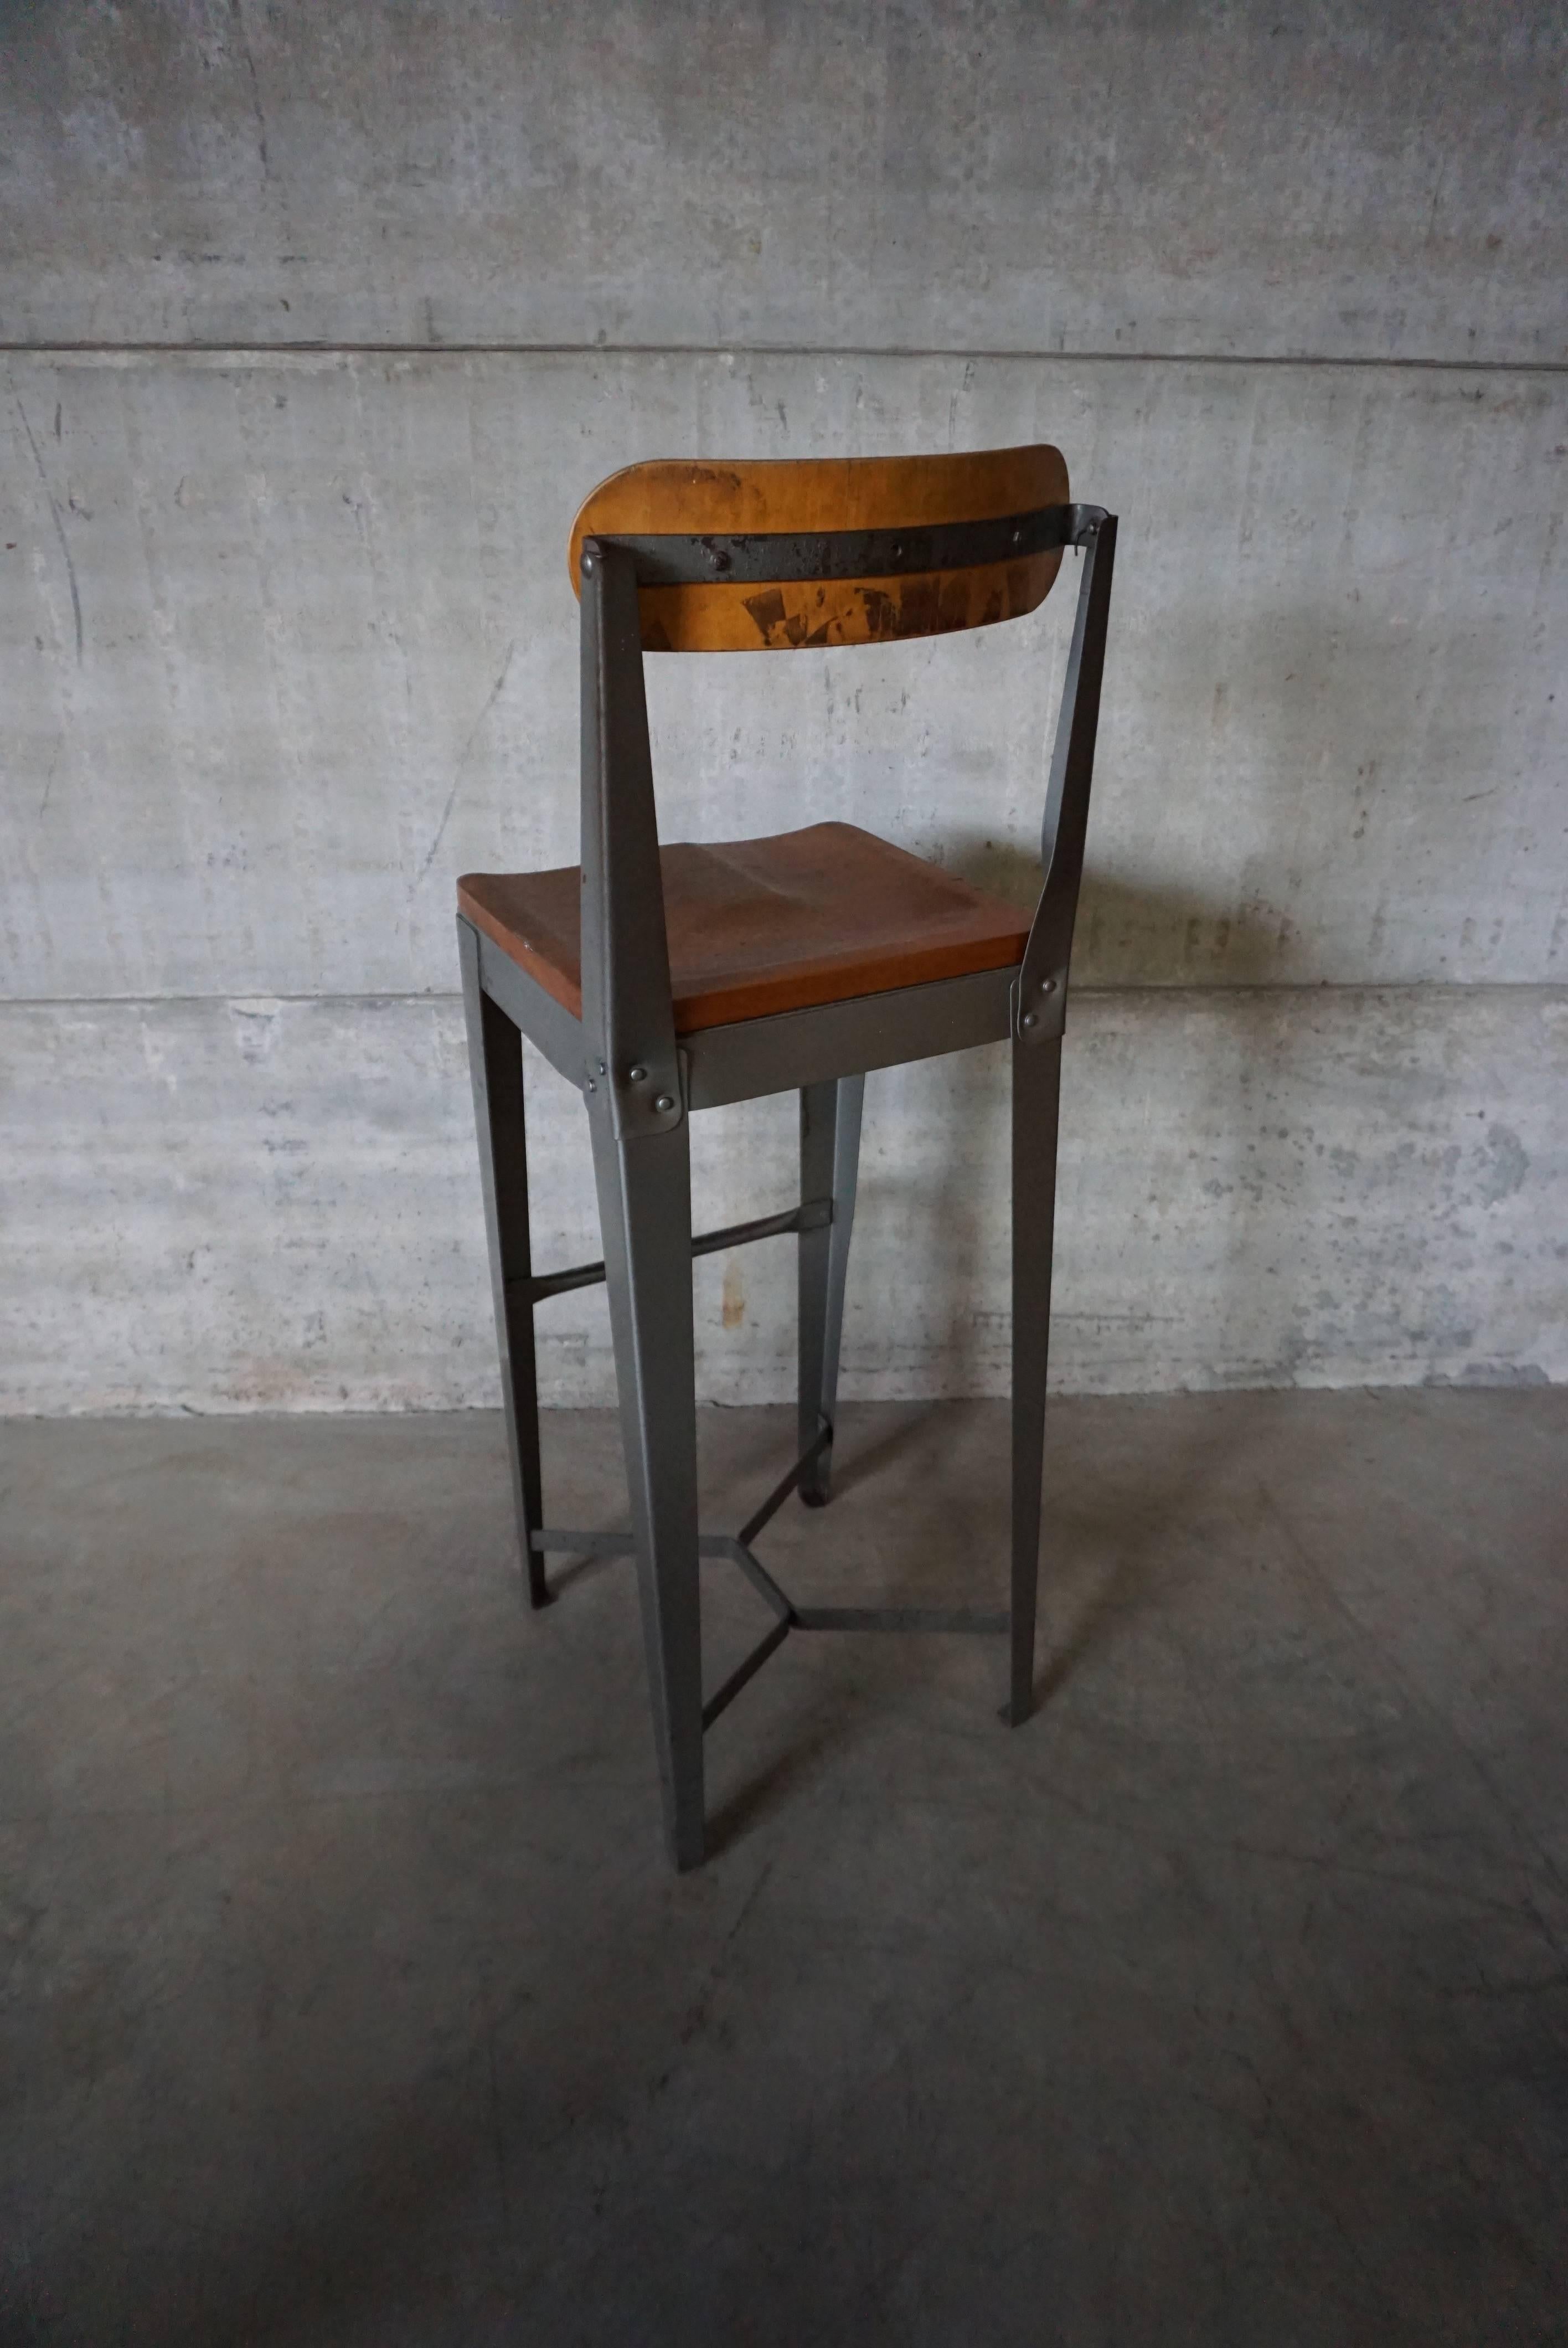 British Factory Chair from England, 1950s